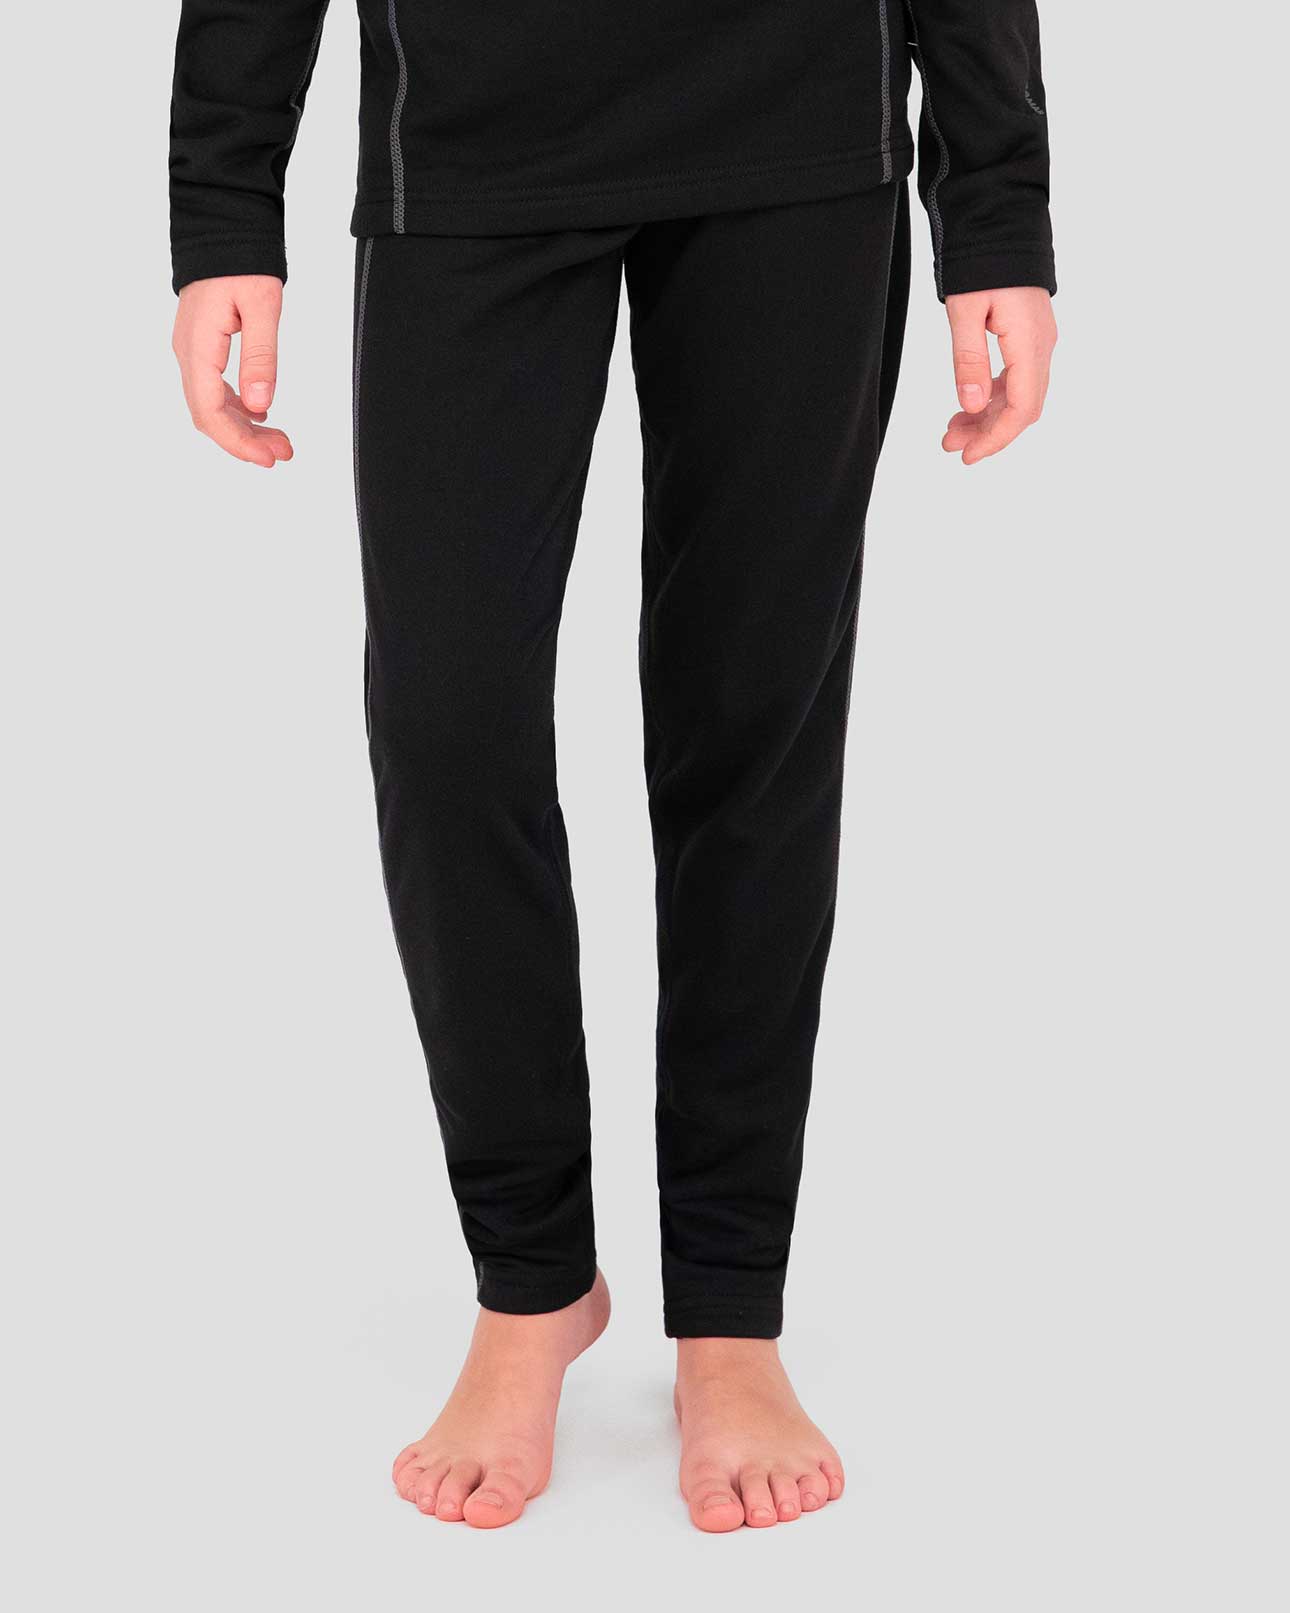 Kids' Genesis Heritage Expedition Weight Fleece Thermal Pants | Color: Onyx